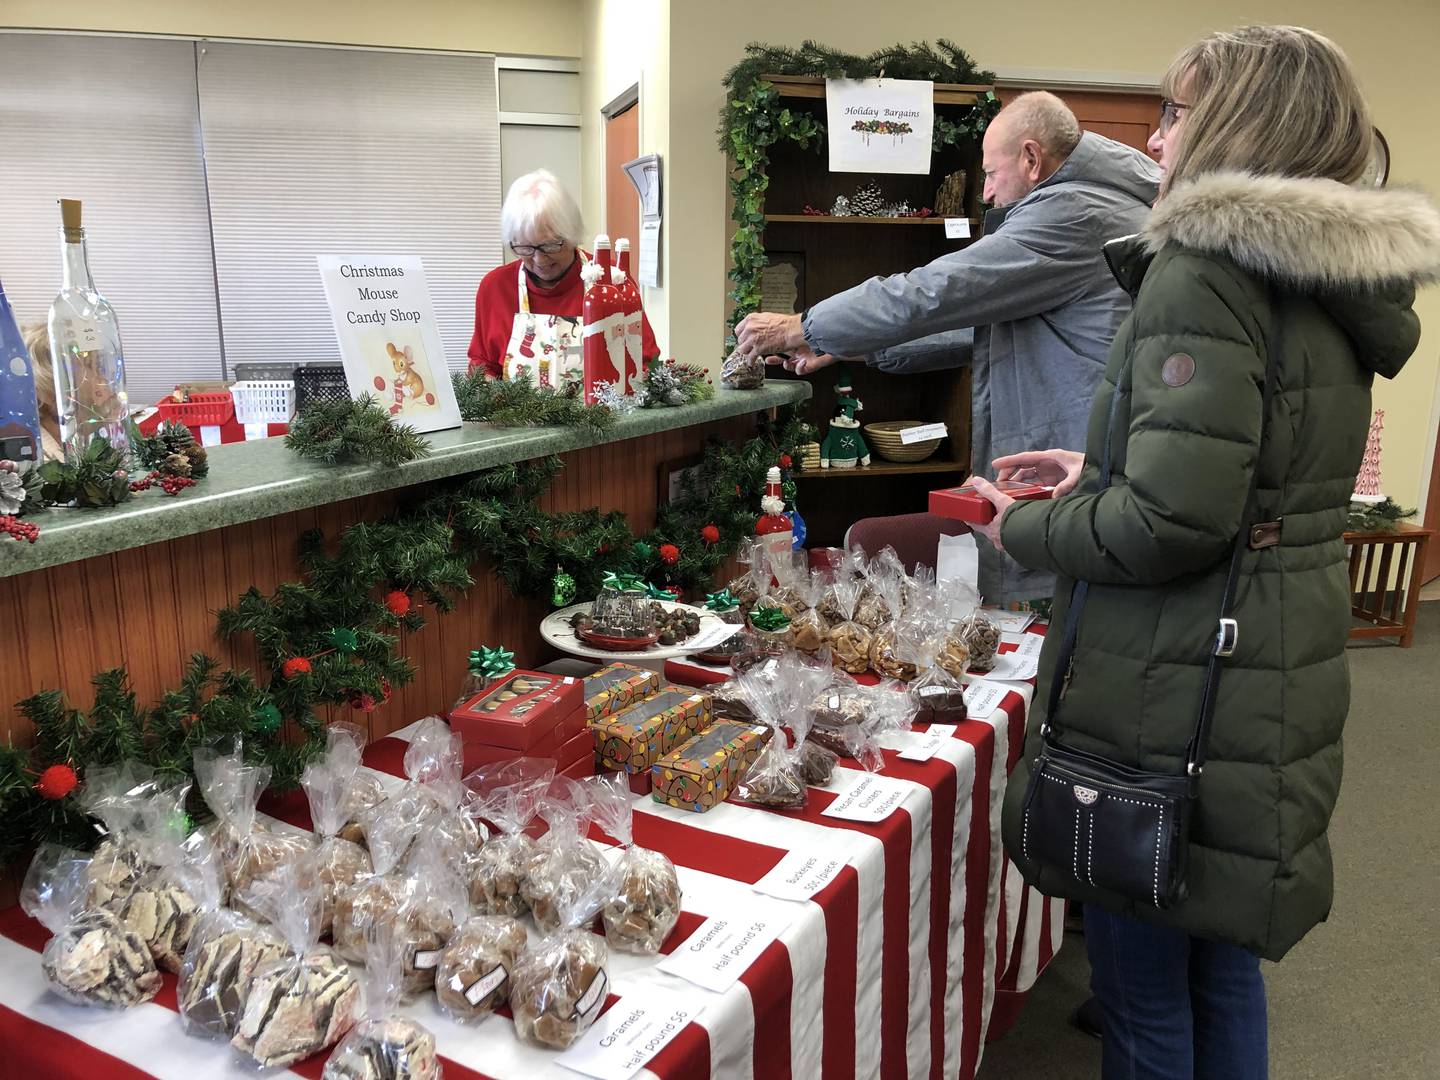 The Christmas Mouse Candy Shop sells candy and other treats at the Open Prairie United Church of Christ Christkindlmarket in Princeton on Saturday, Nov. 19, 2022.